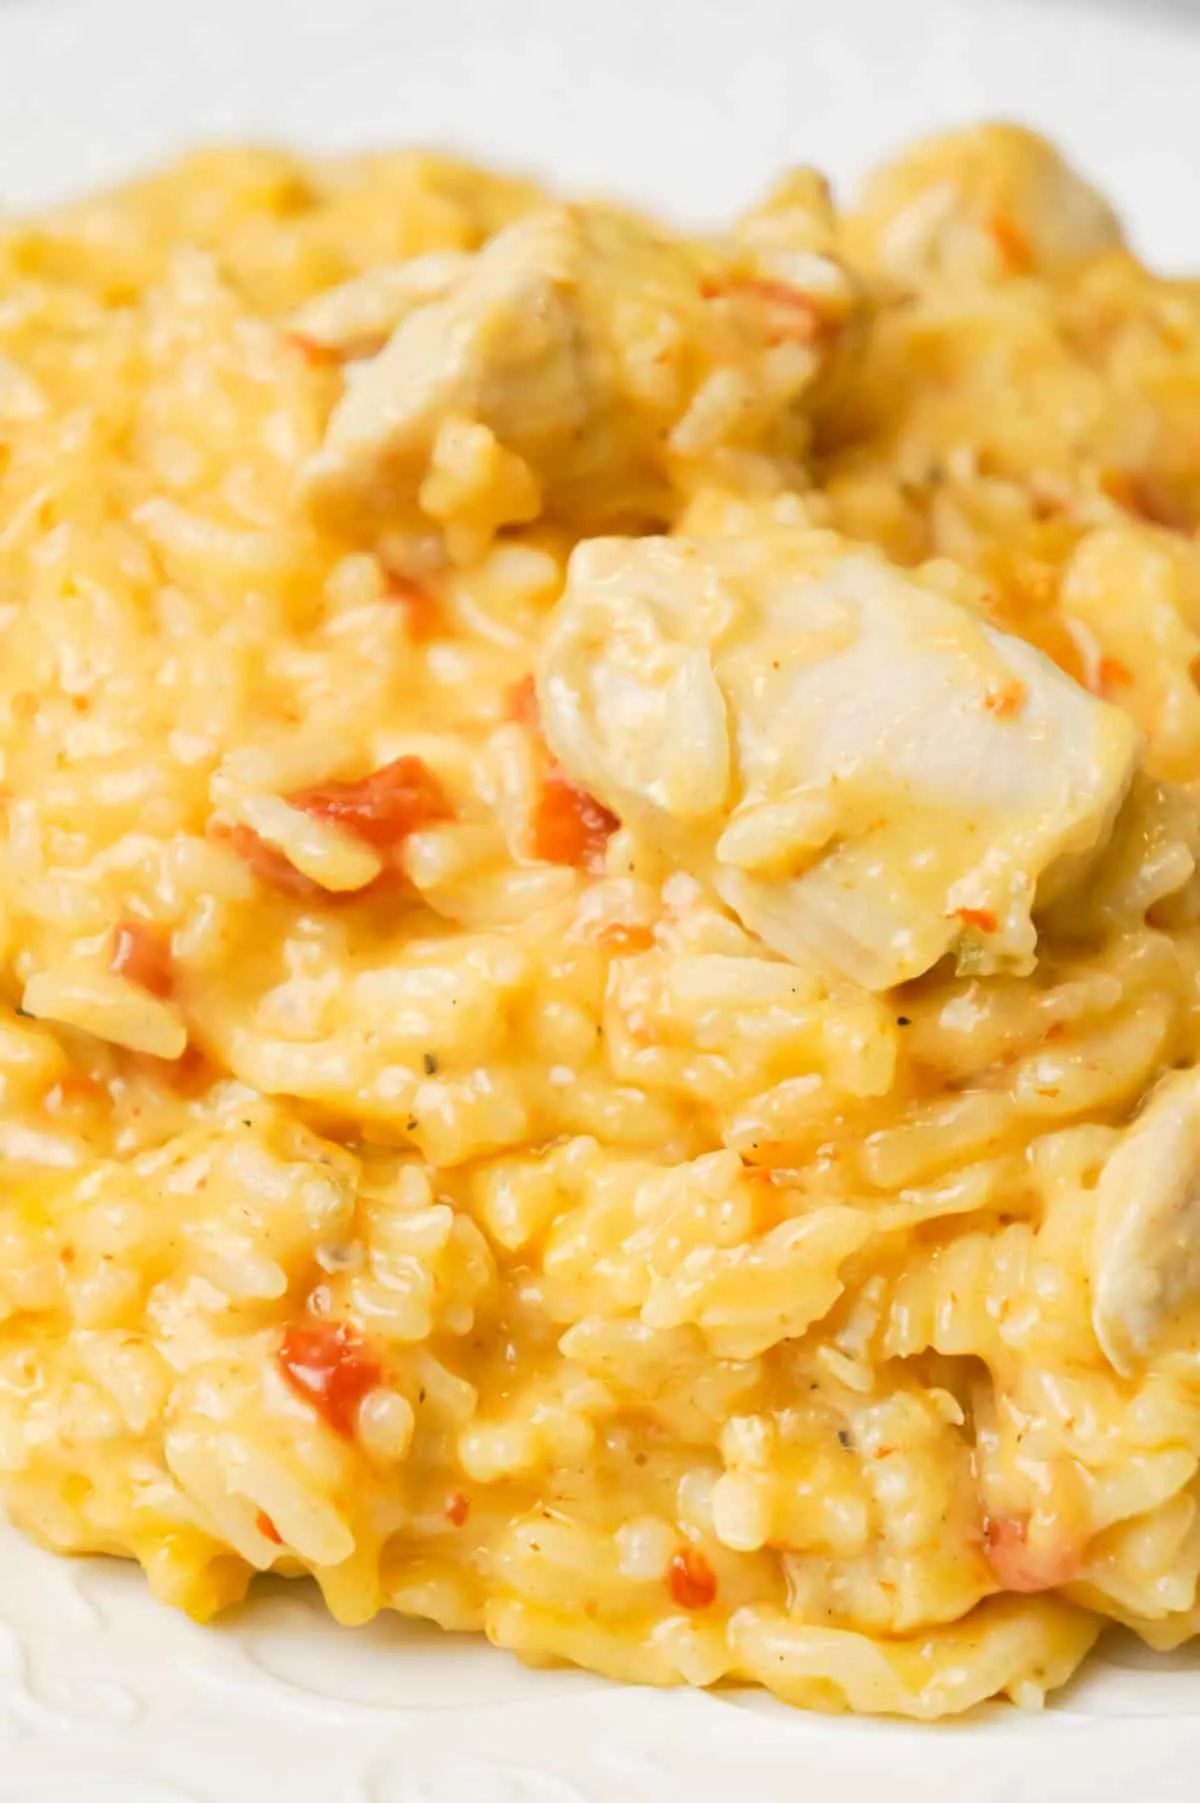 Instant Pot Cheesy Chicken and Rice is an easy pressure cooker dinner recipe made with long grain white rice and loaded with chunks of boneless, skinless chicken breasts and shredded cheese.